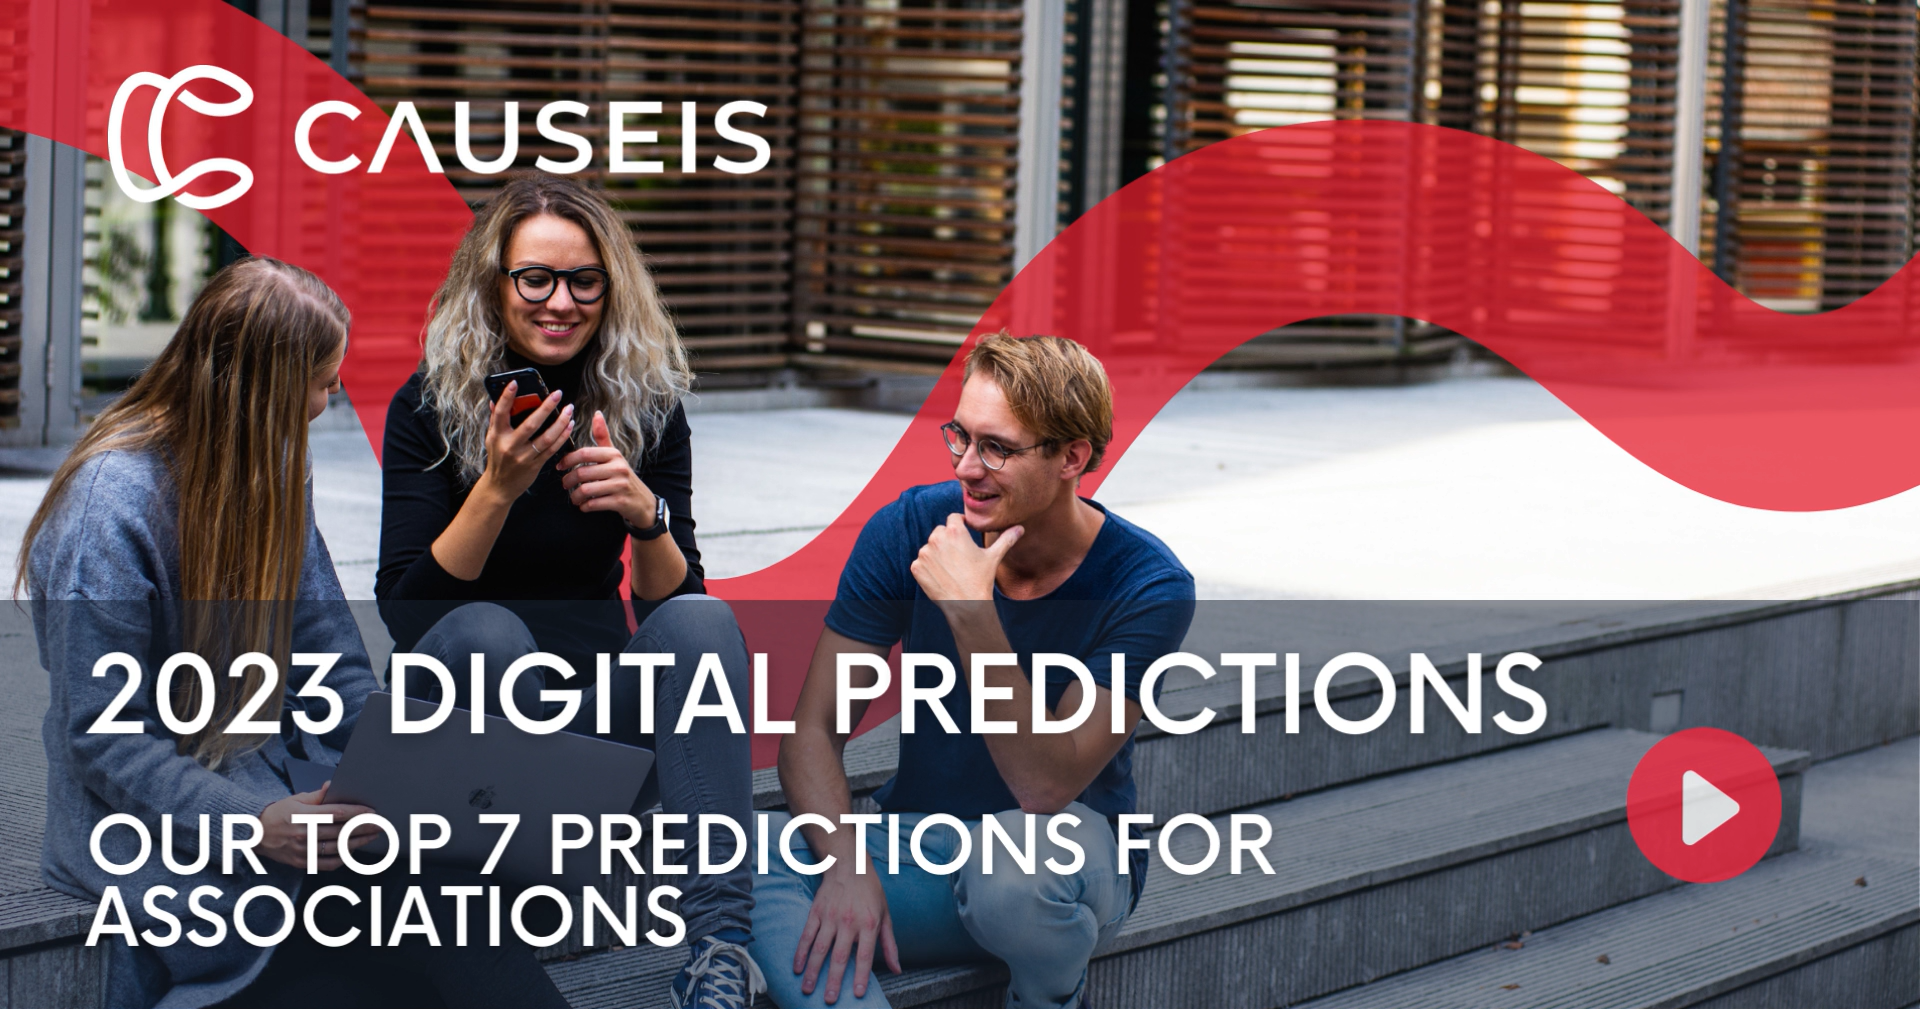 Causeis 2023 Digital Predictions for Associations